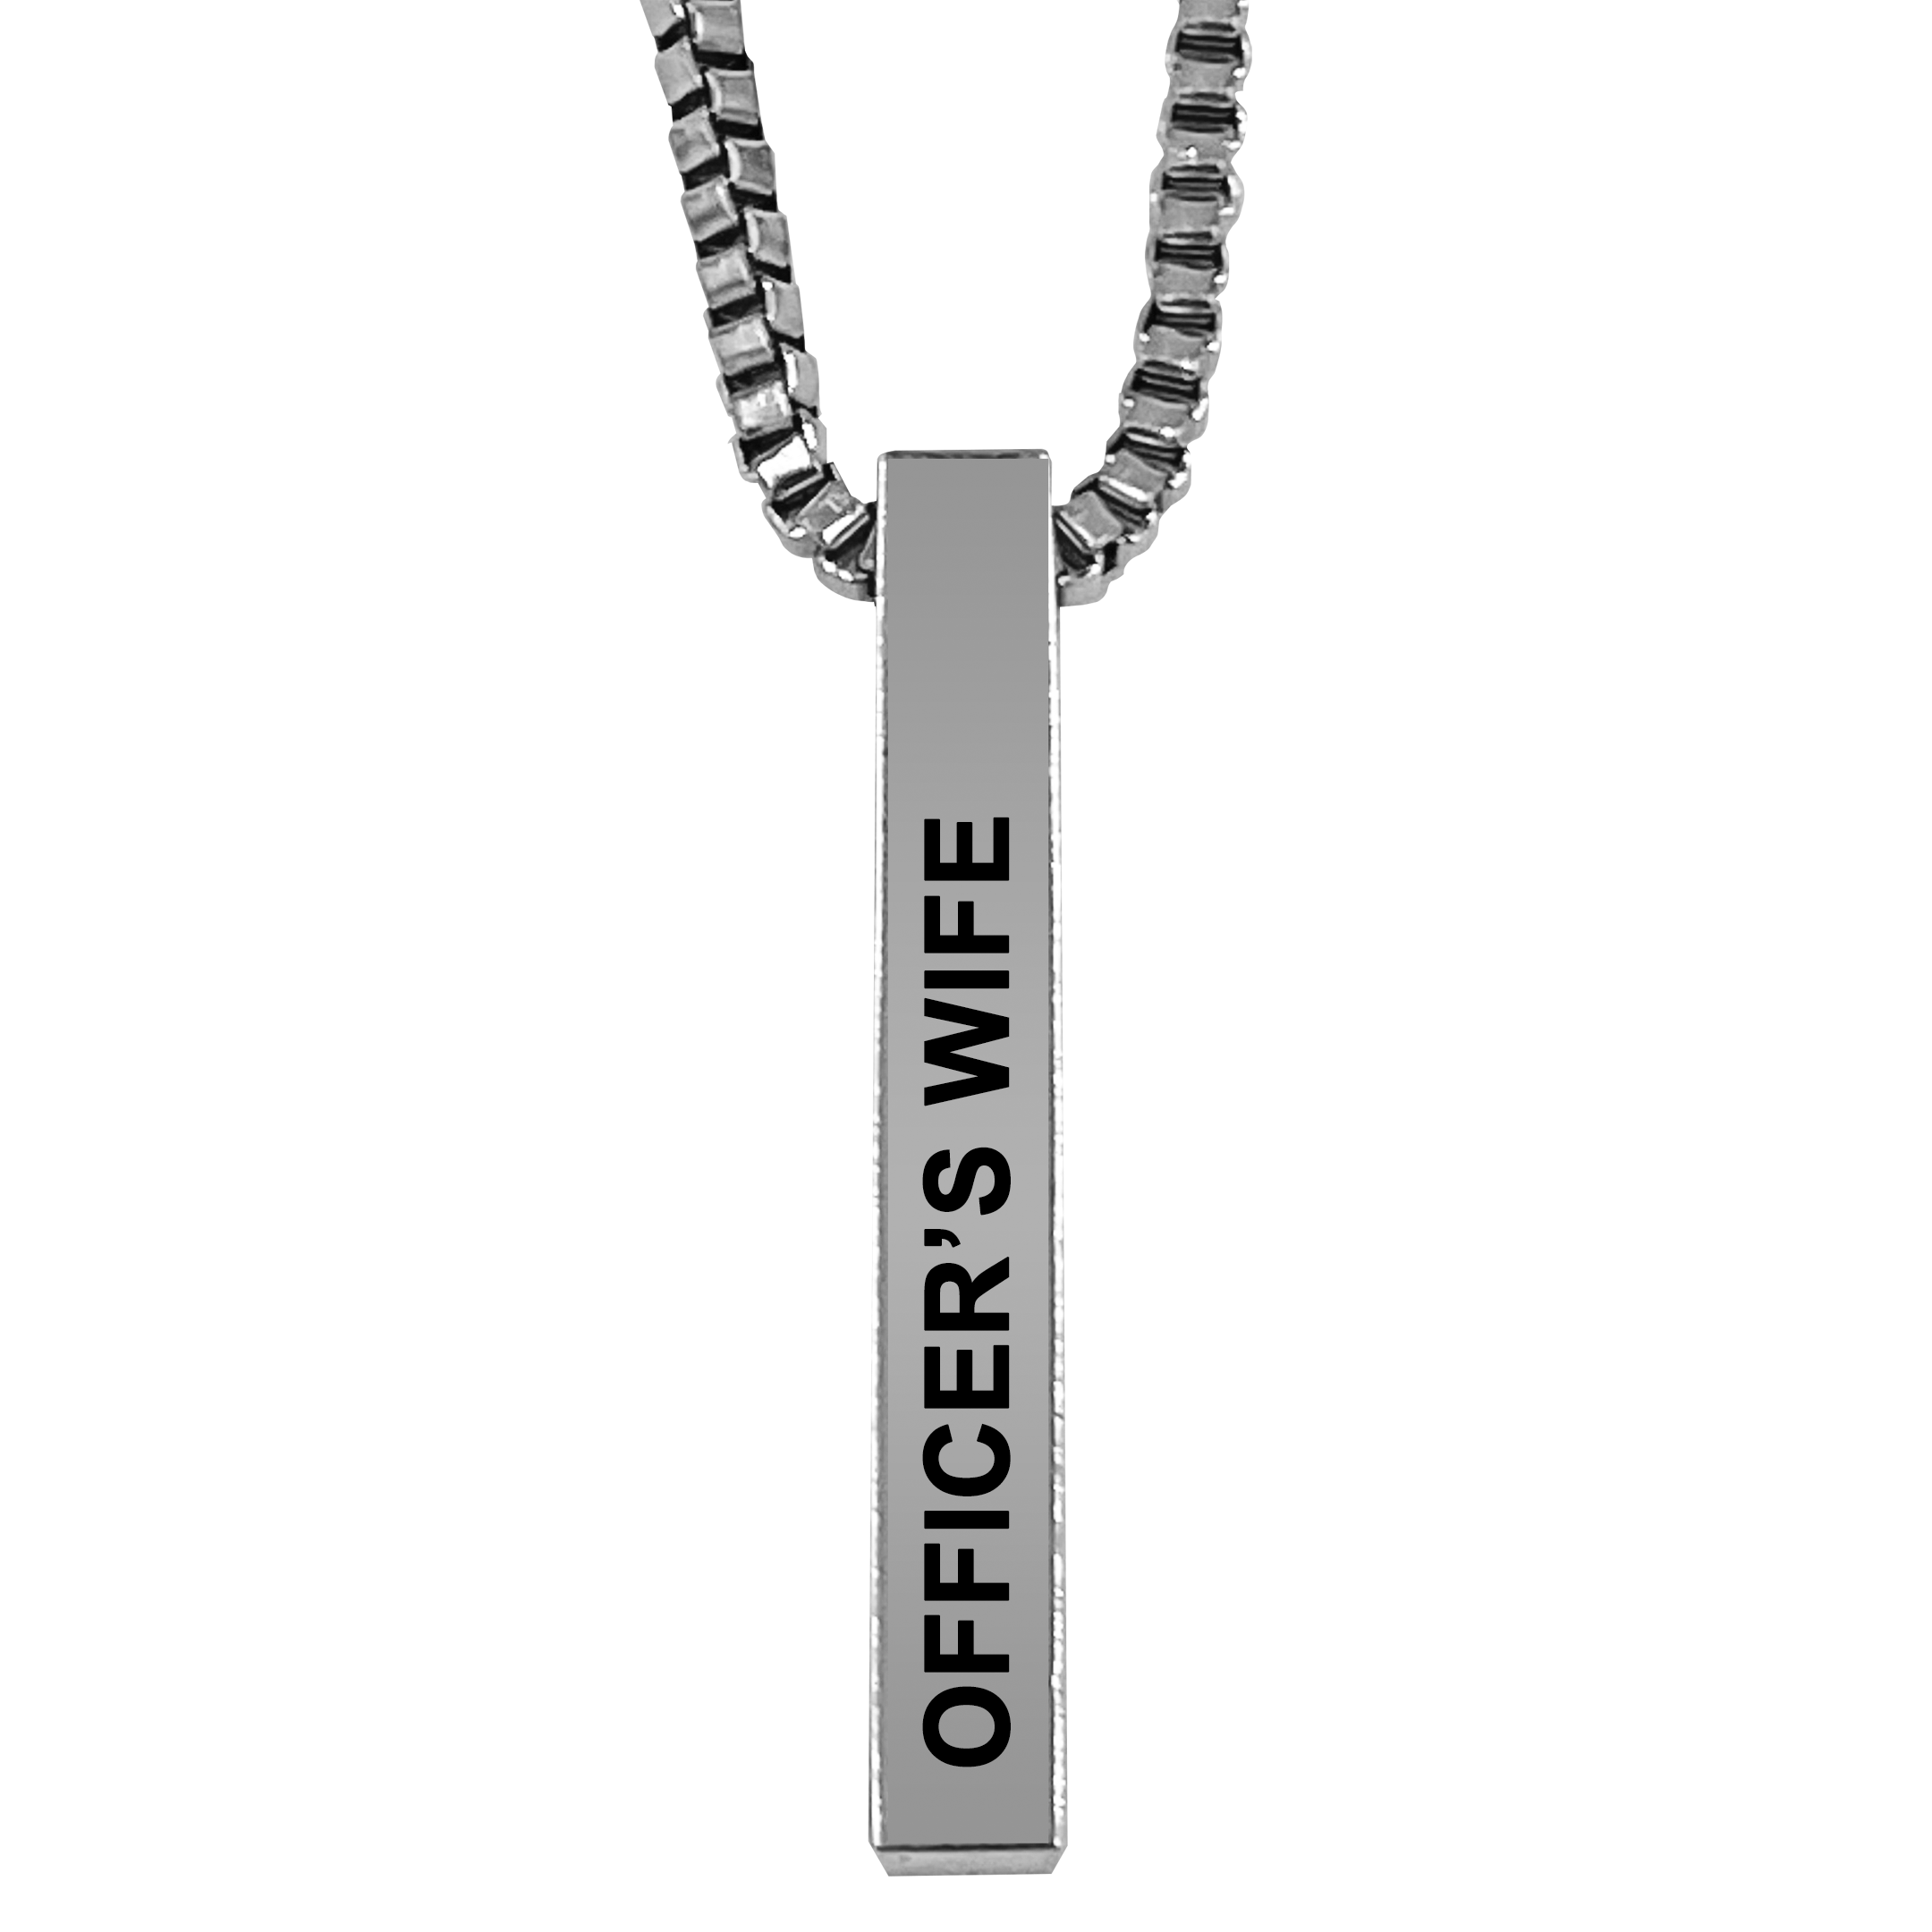 Officer's Wife Silver Plated Pillar Bar Pendant Necklace Gift Mother's Day Christmas Holiday Anniversary Police Officer First Responder Law Enforcement